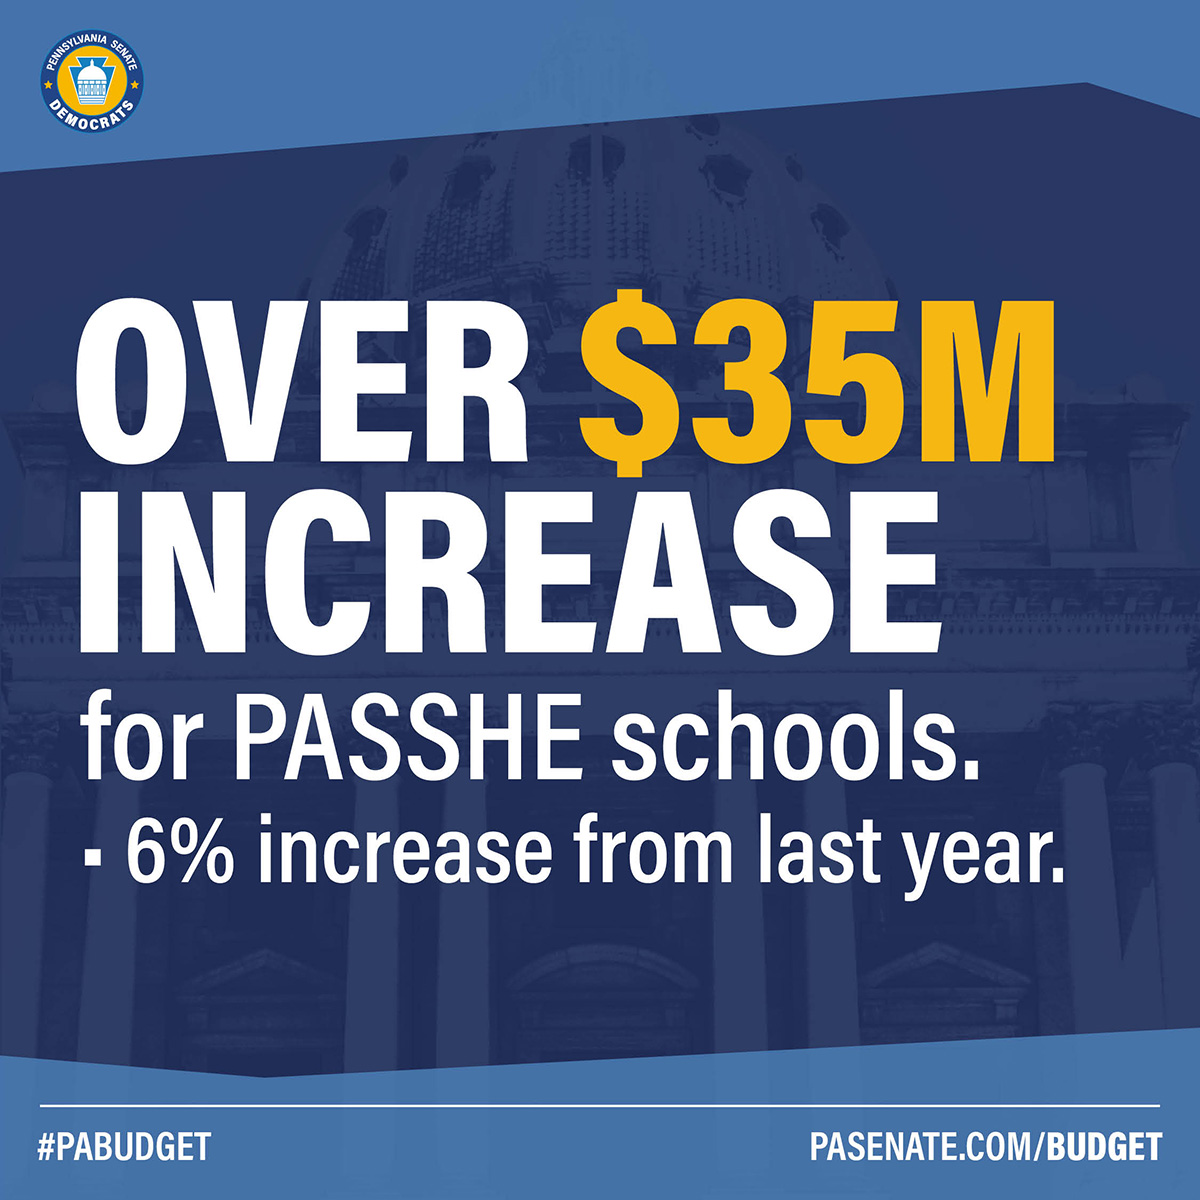 Over $35M Increase for PASSHE schools